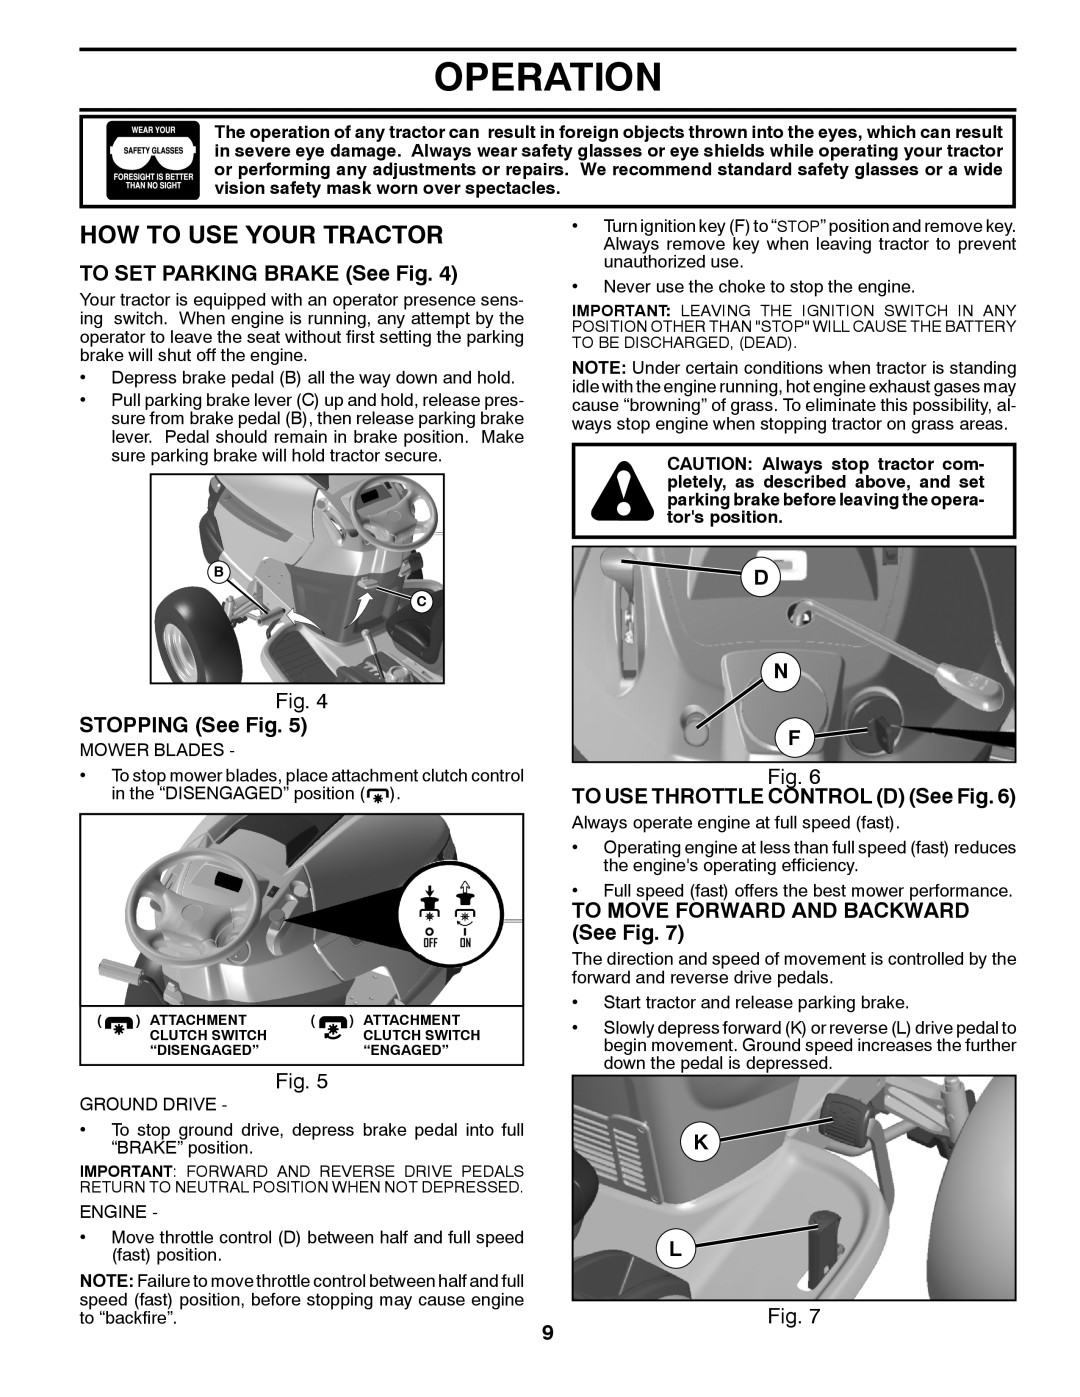 Husqvarna 532 43 65-03 How To Use Your Tractor, TO SET PARKING BRAKE See Fig, STOPPING See Fig, D N F, Operation 